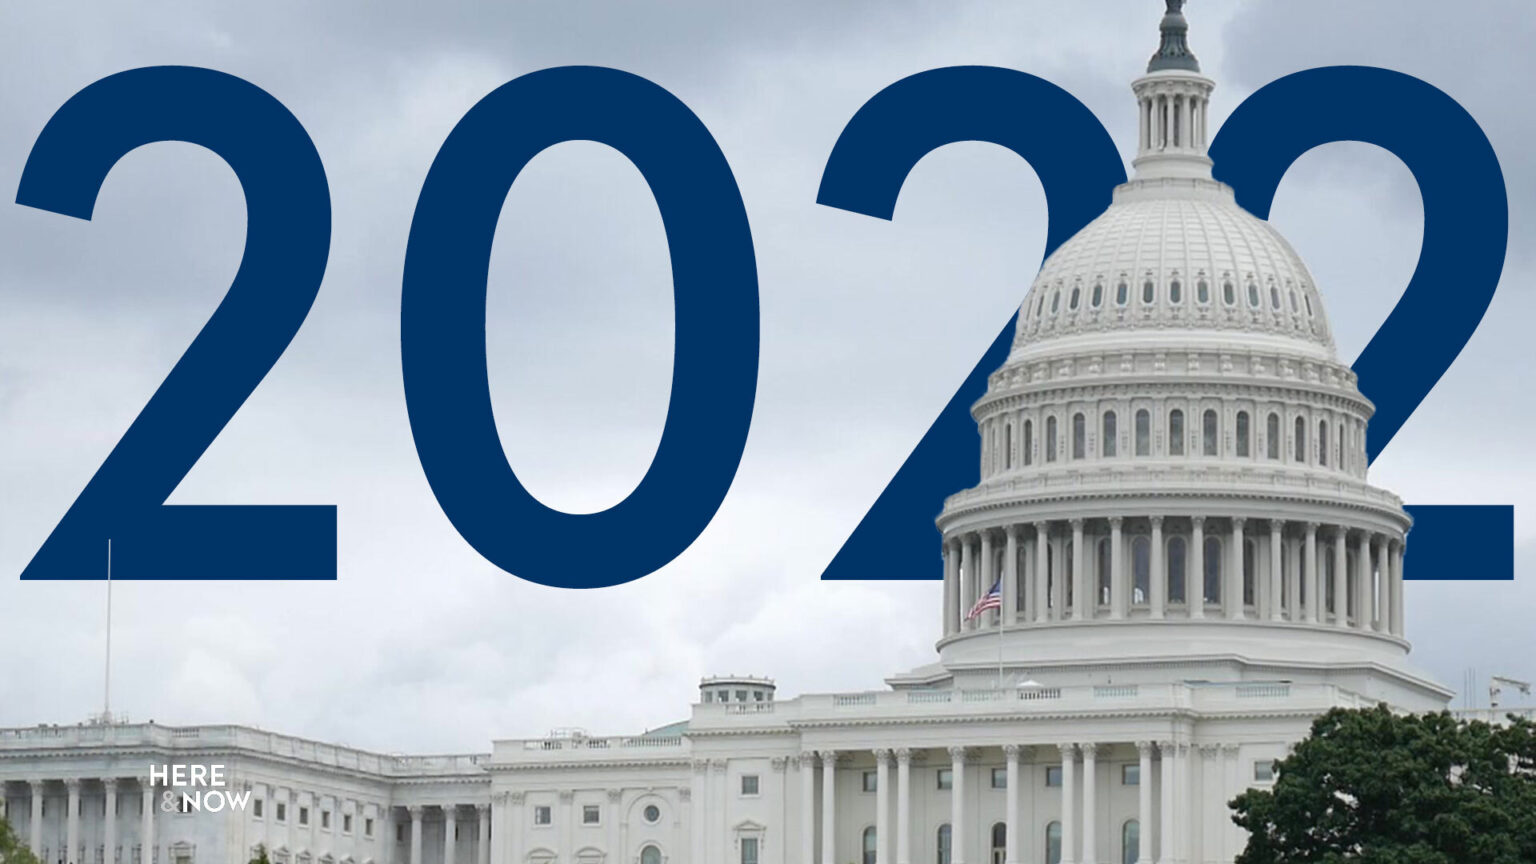 A photo collage features the U.S. Capitol building and dome and 2022 in blue numerals in the background.